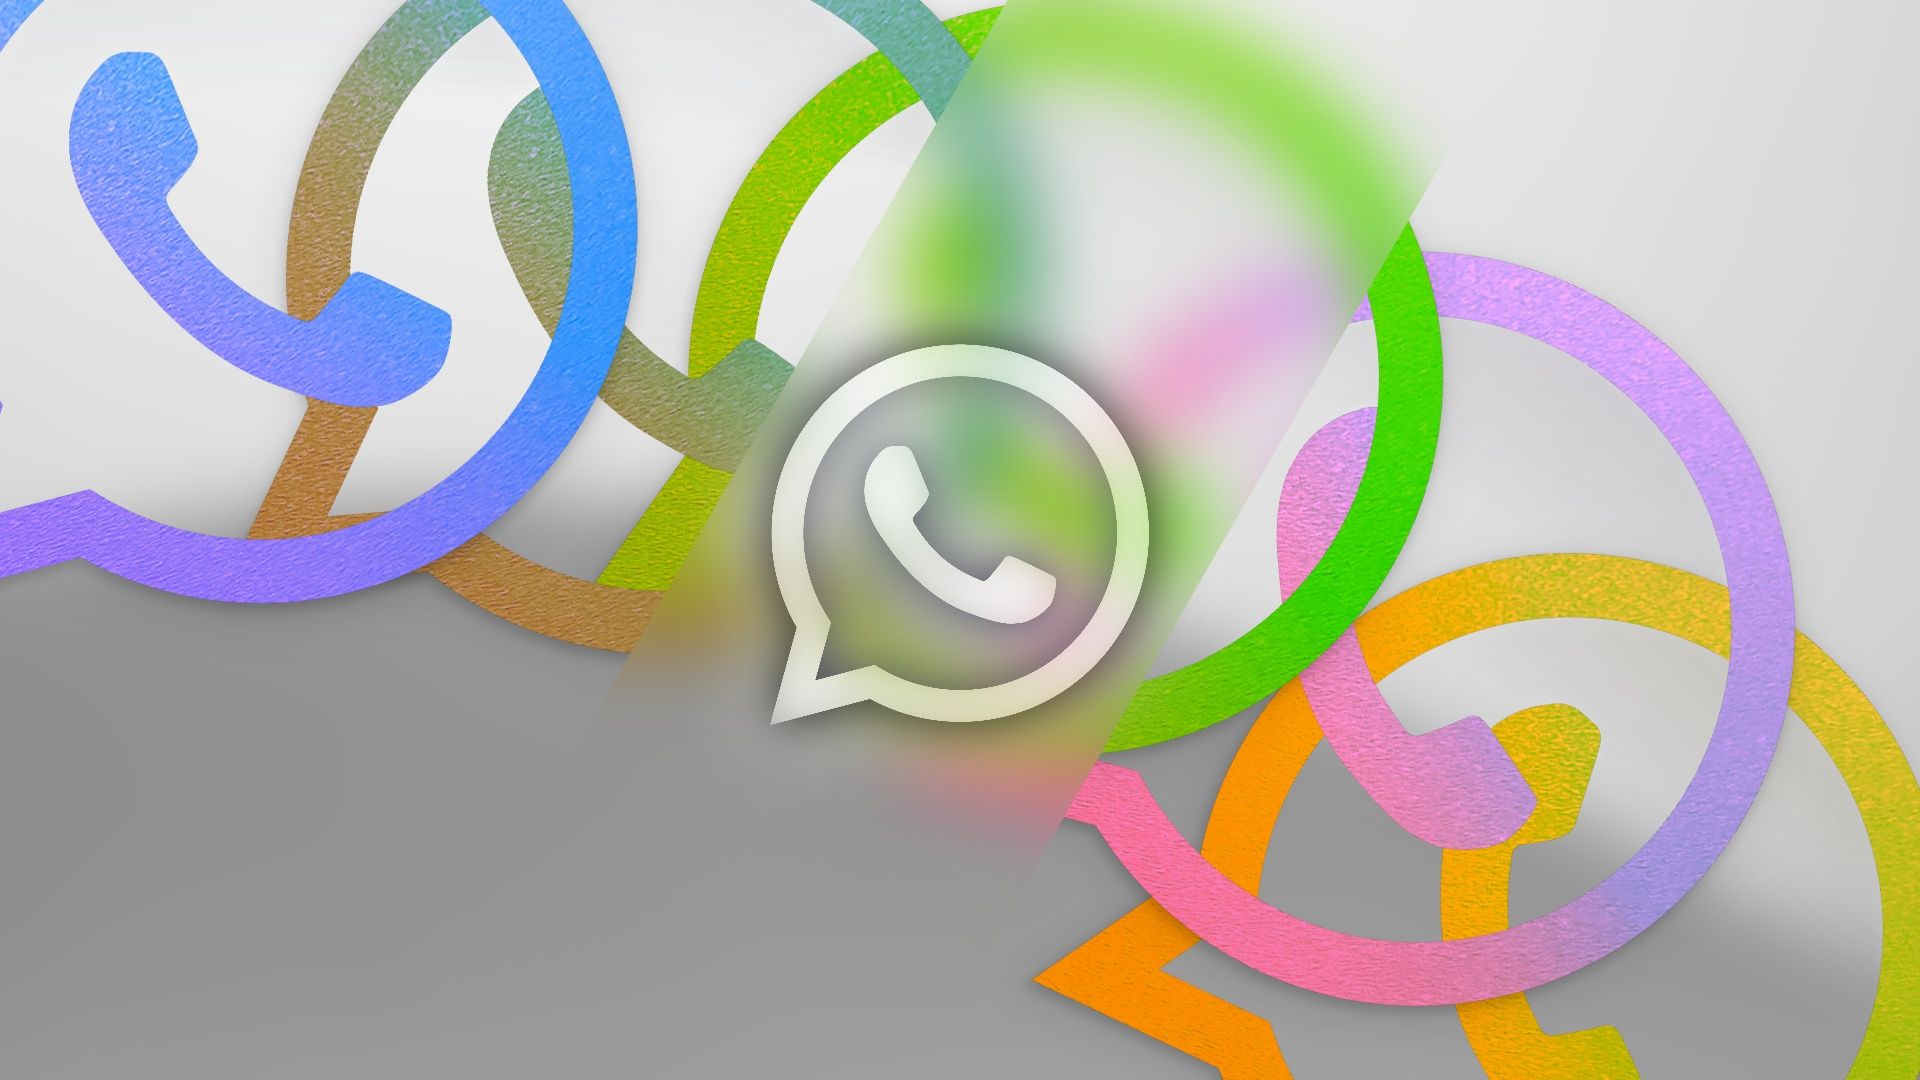 whatsapp-group-chats-soon-won-t-look-like-forum-discussions